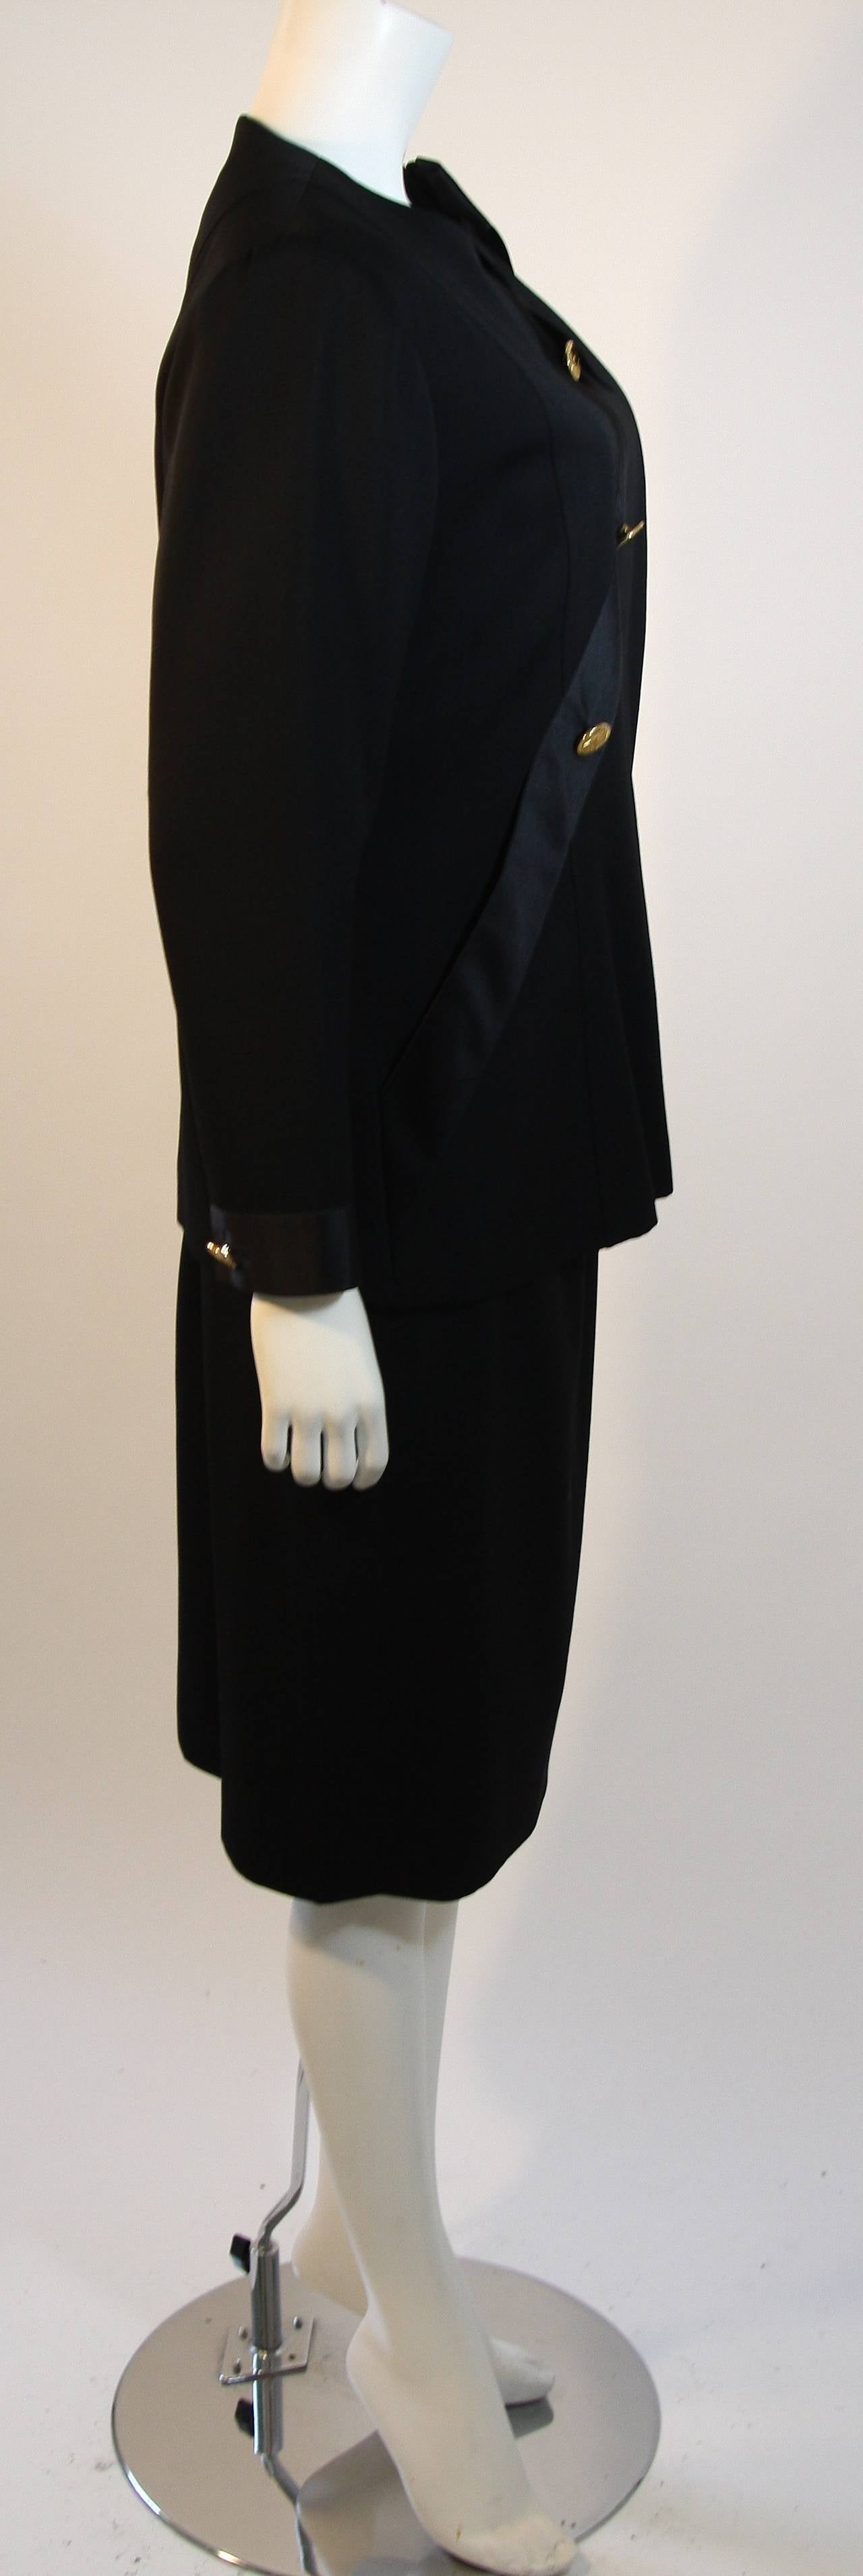 2001 Chanel Black wool with Silk Ribbon Sash & Bow Jacket & Skirt Suit In Excellent Condition For Sale In Los Angeles, CA